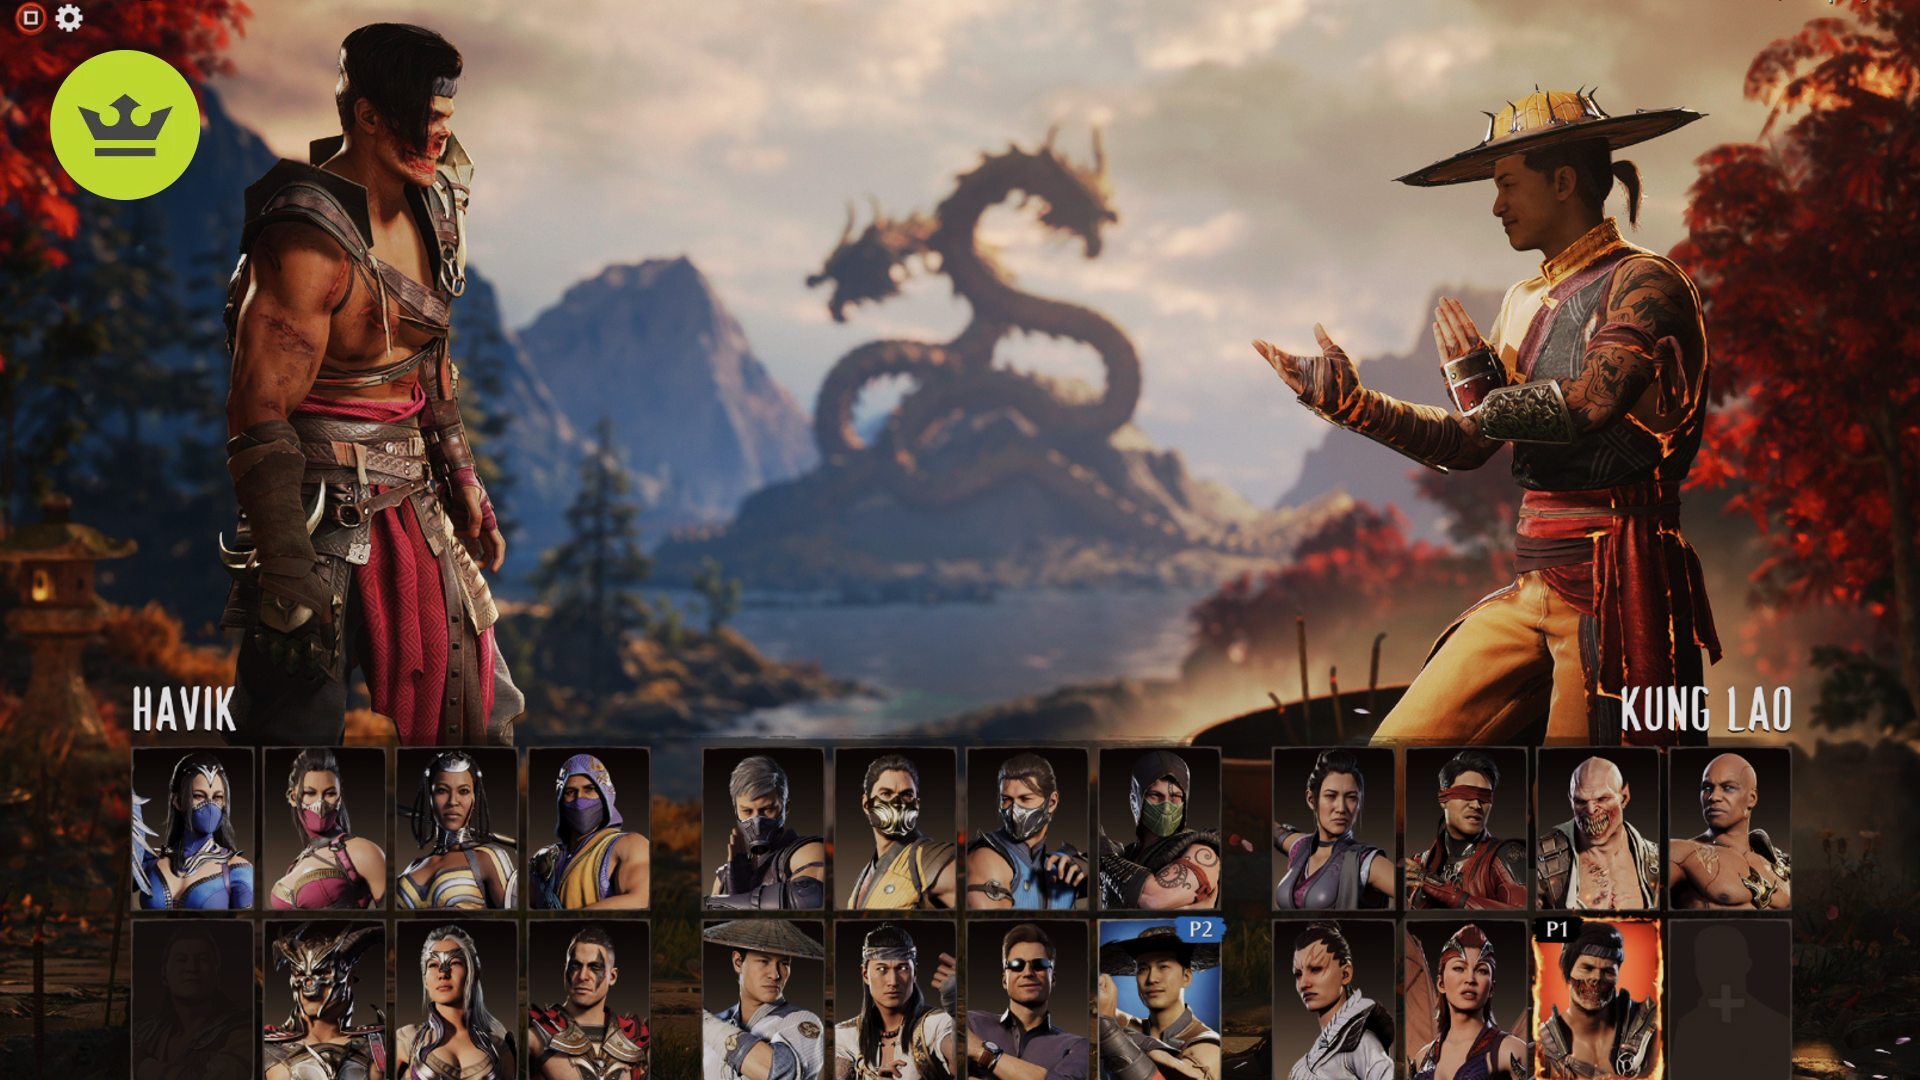 Diff on X: This frame of Scorpion's kameo in Mortal Kombat 1 goes HARD   / X